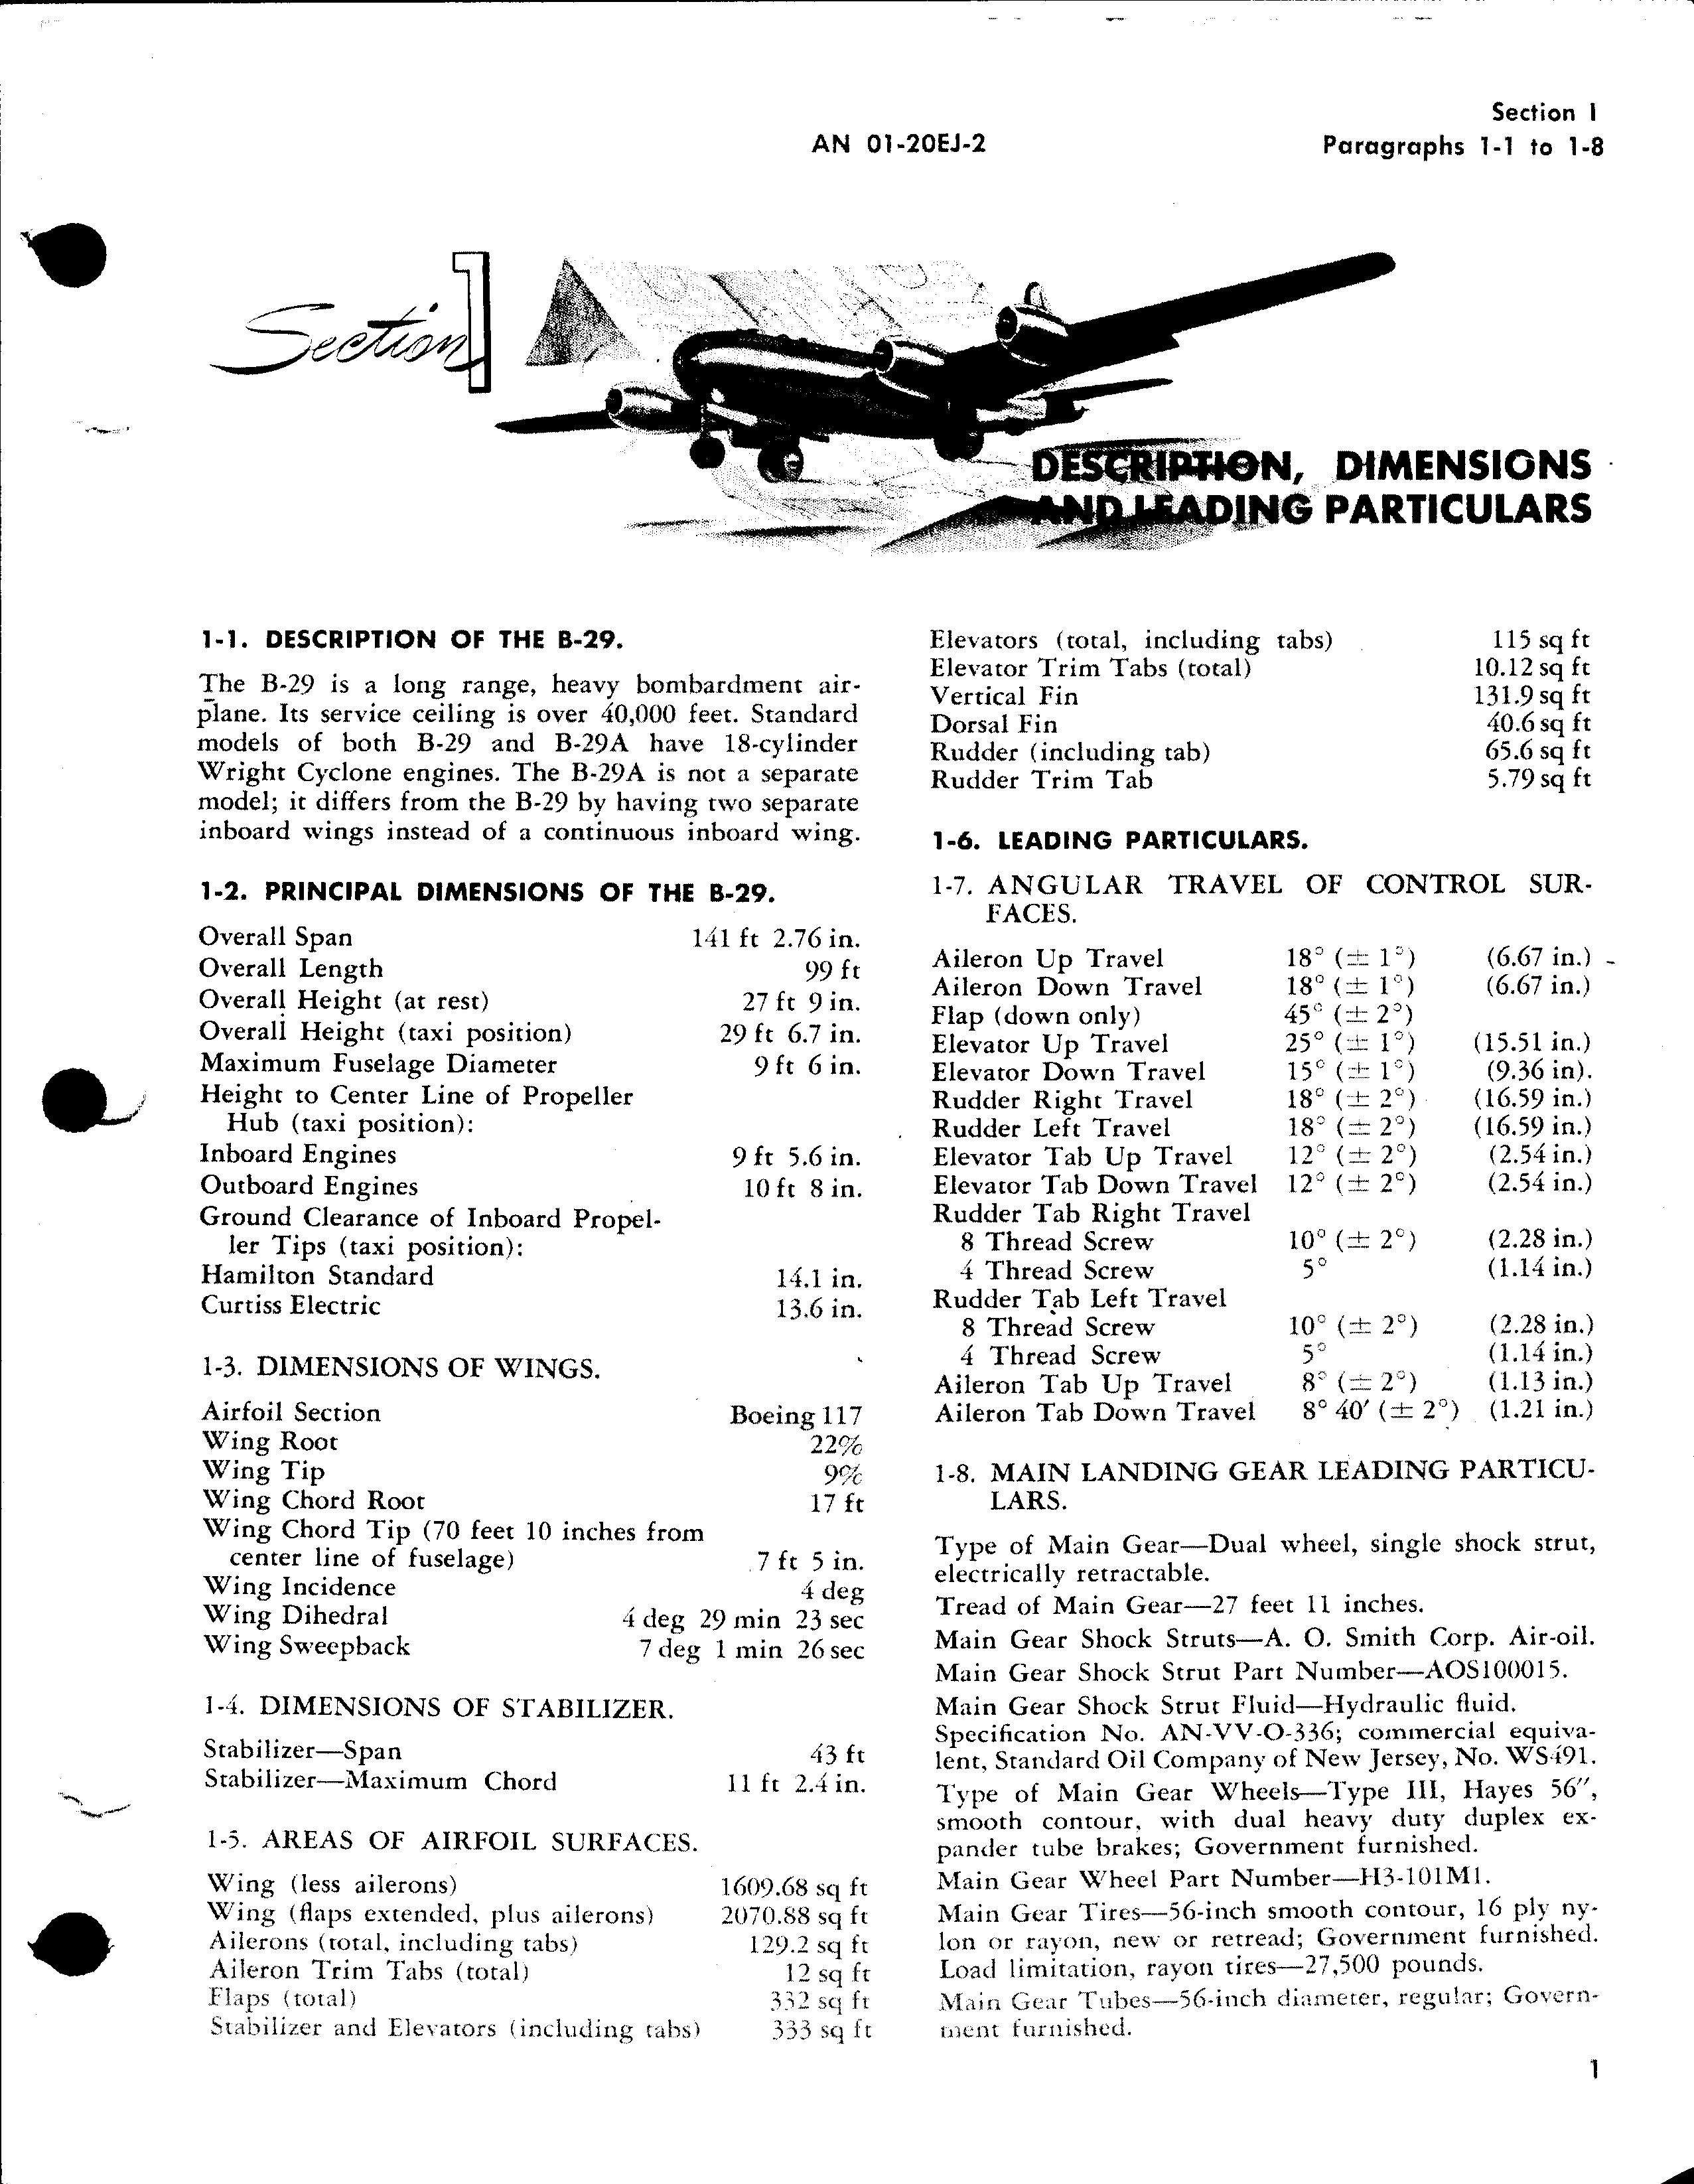 Sample page 5 from AirCorps Library document: Erection and Maintenance Instructions for the B-29 and B-29A